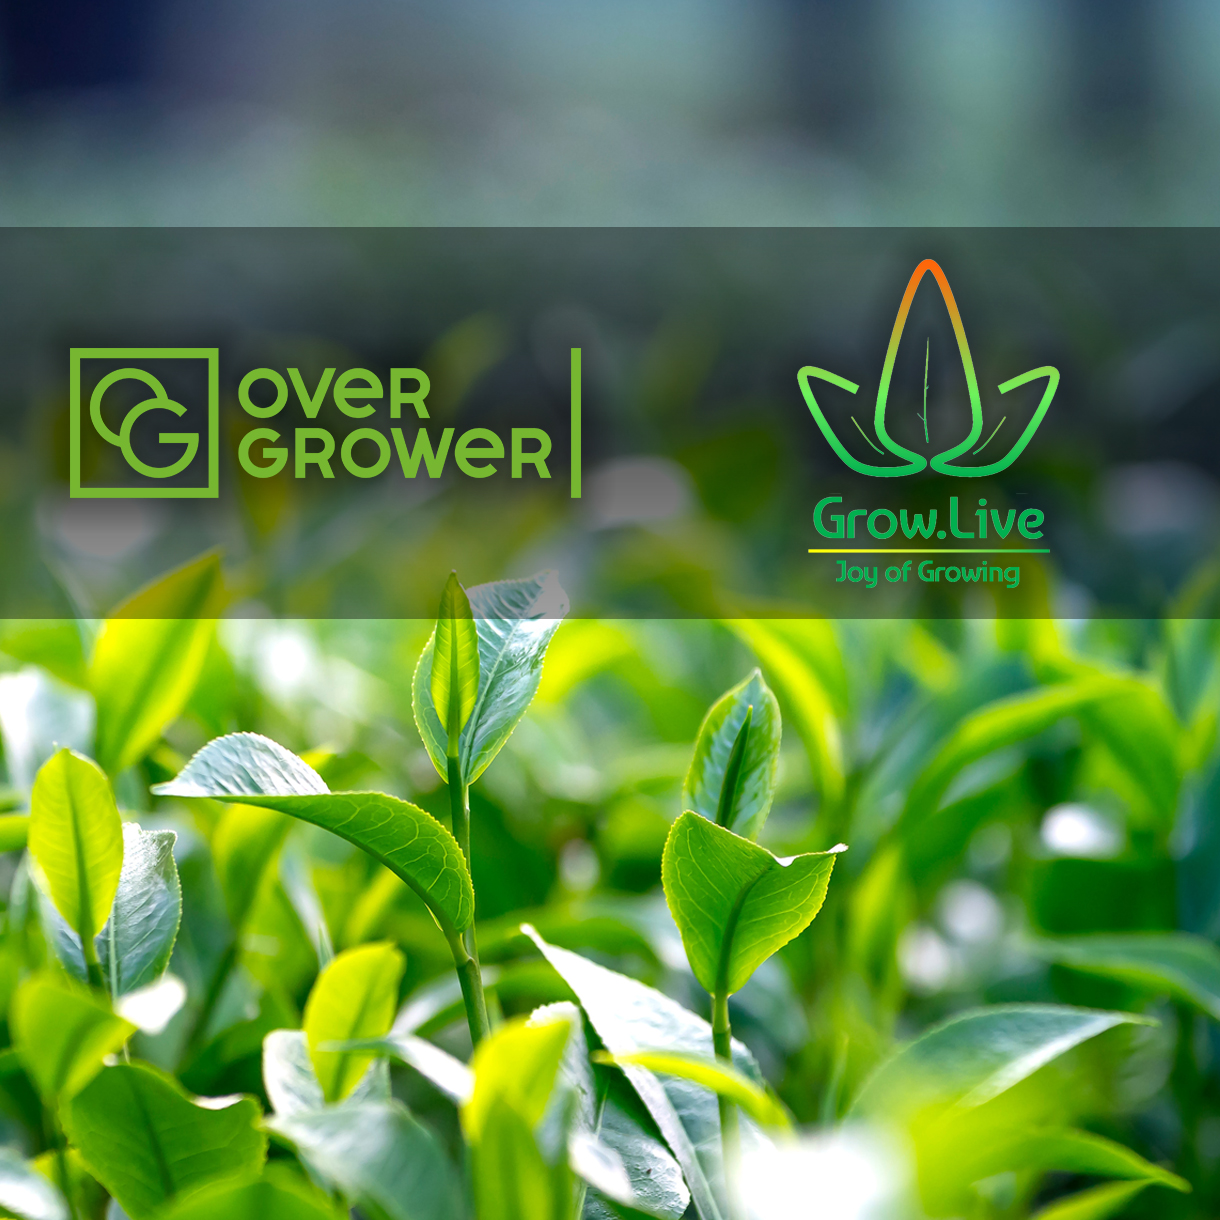 The Partnership Agreement with Grow Live Systems executed!